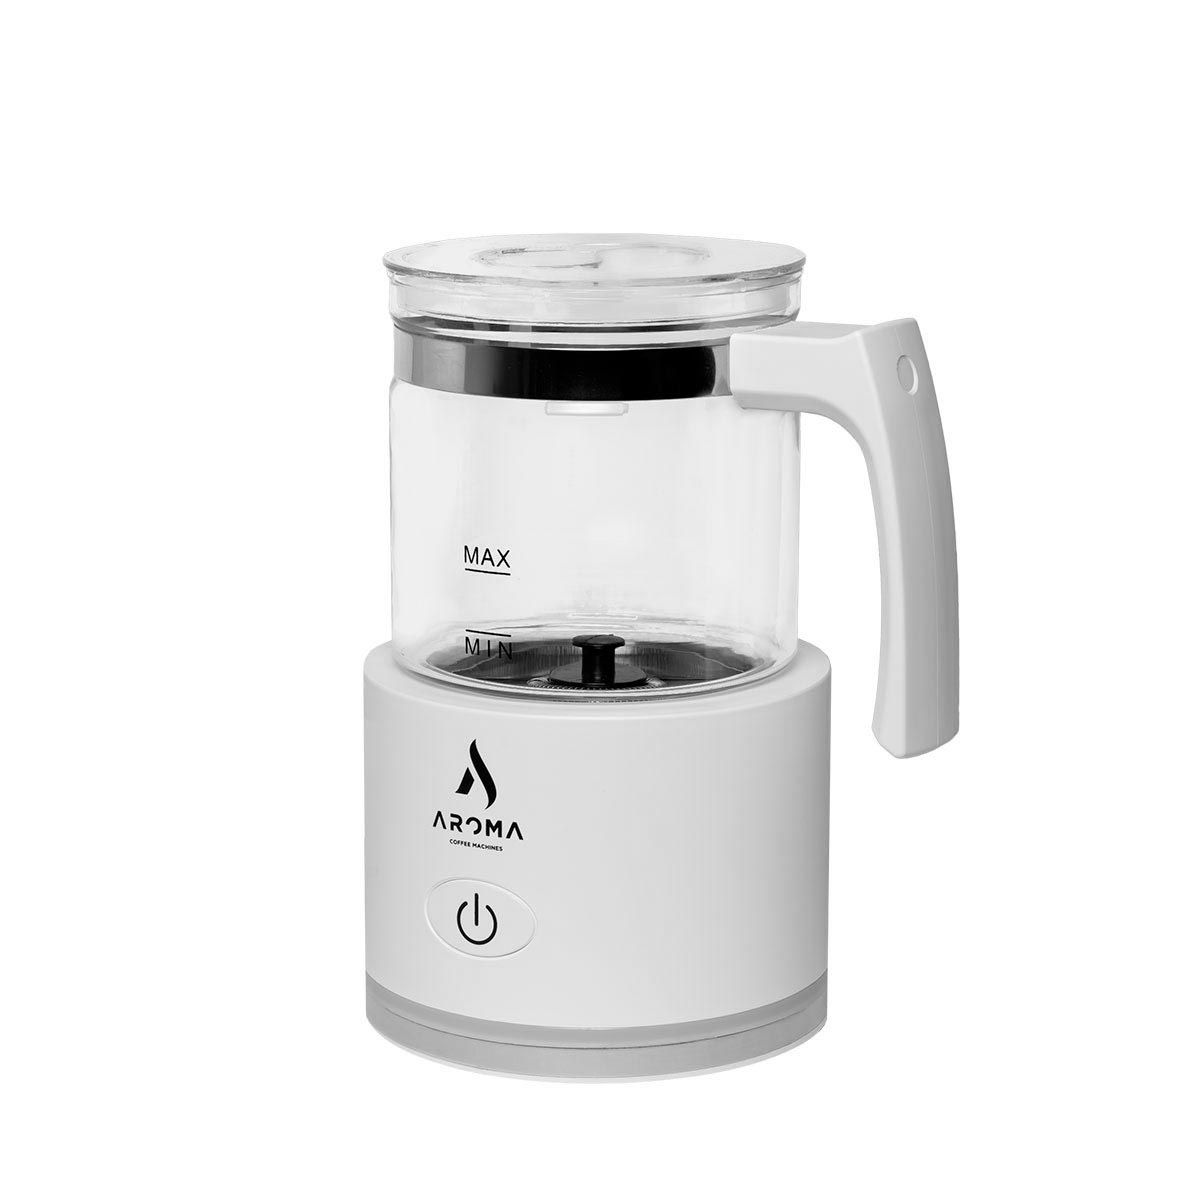 Aroma milk frother